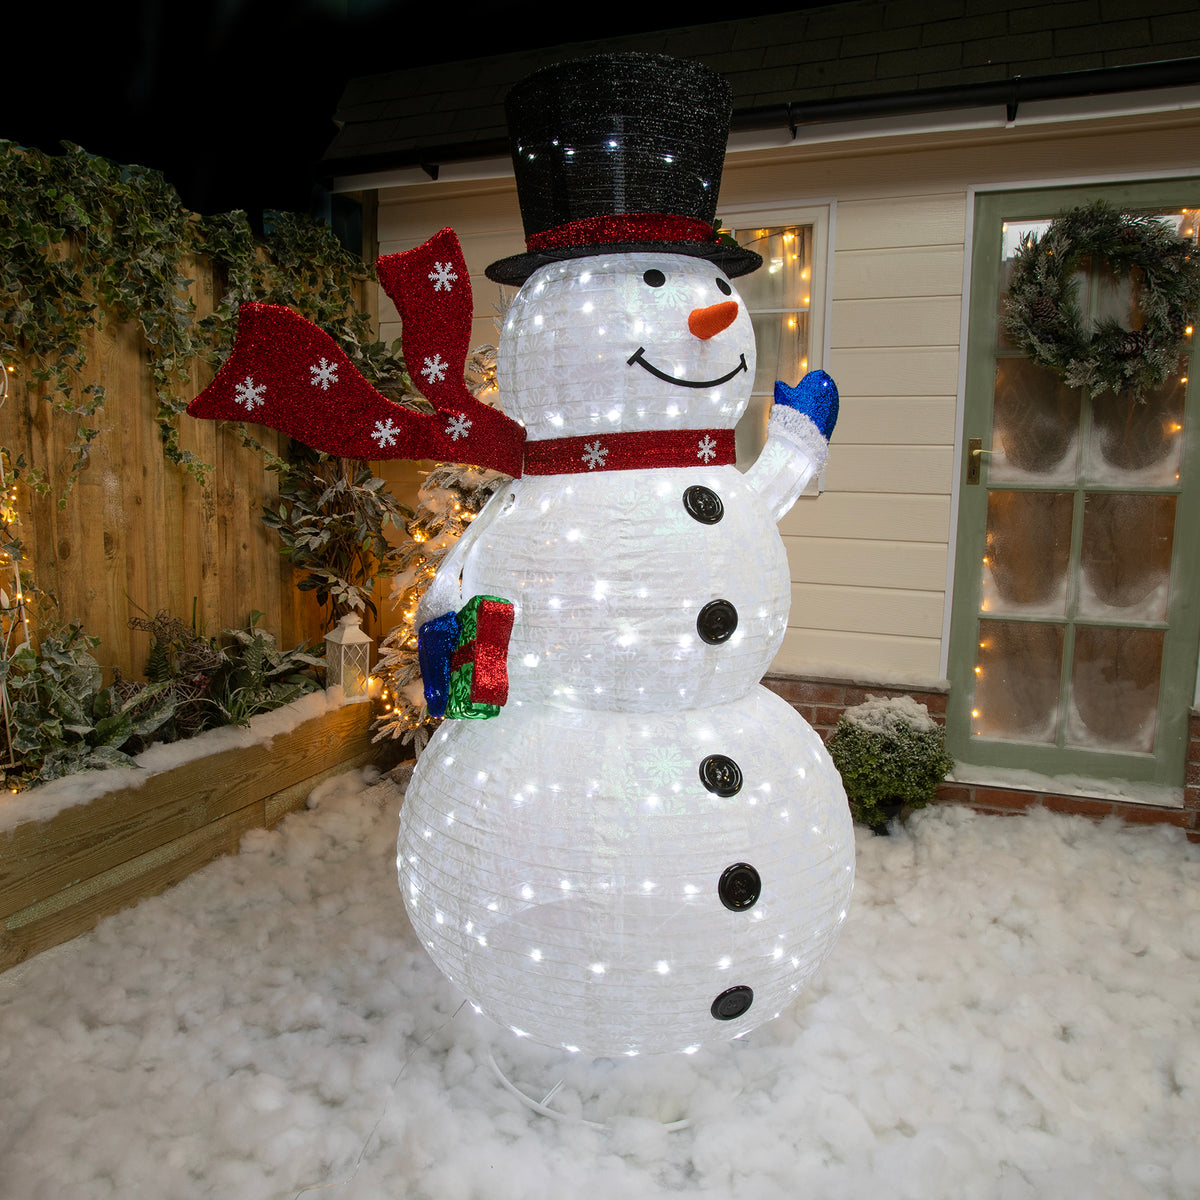 Christmas Snowman Lights - 1.8M Pop-Up Outdoor Light Up Snowmen with 200 White Twinkling LEDs